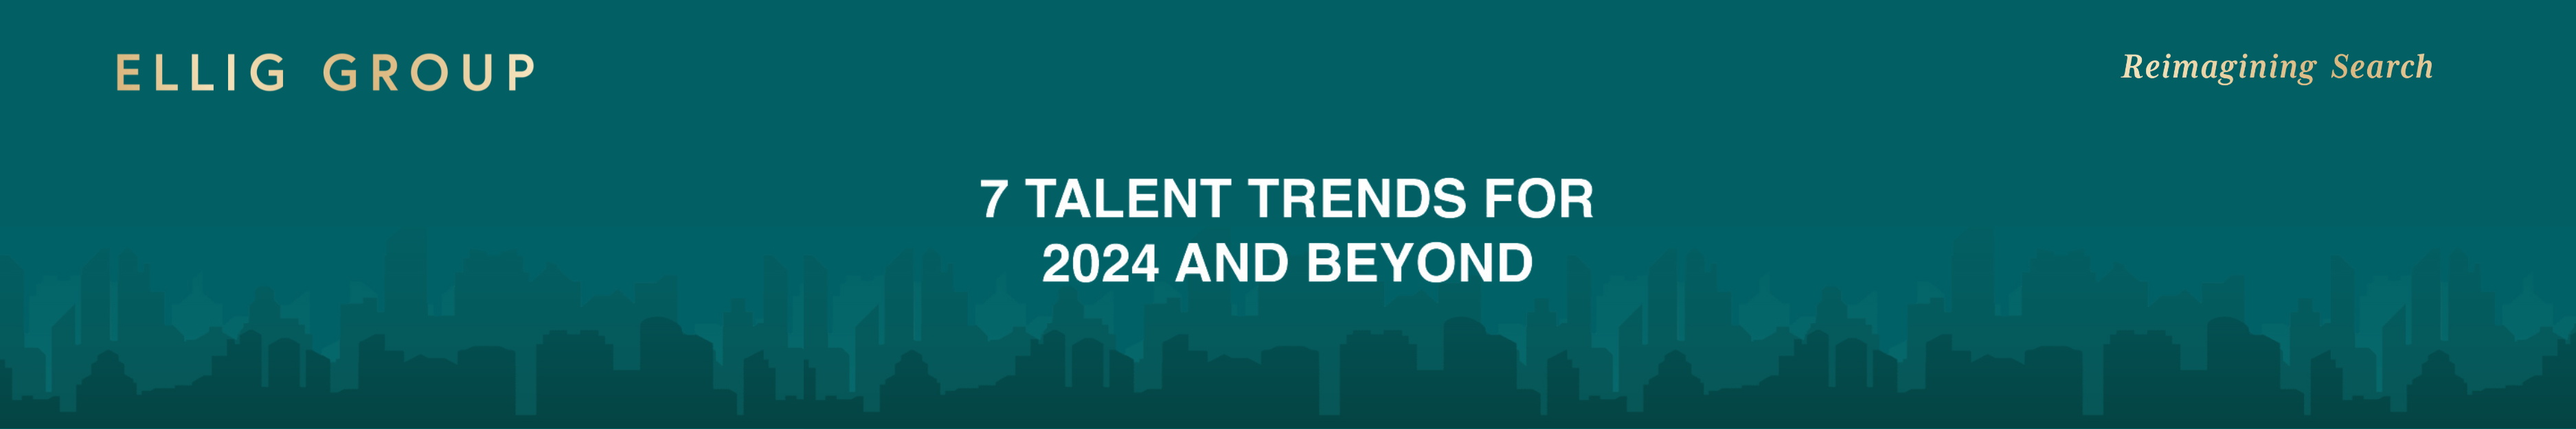 7 Talent Trends for 2024 and Beyond